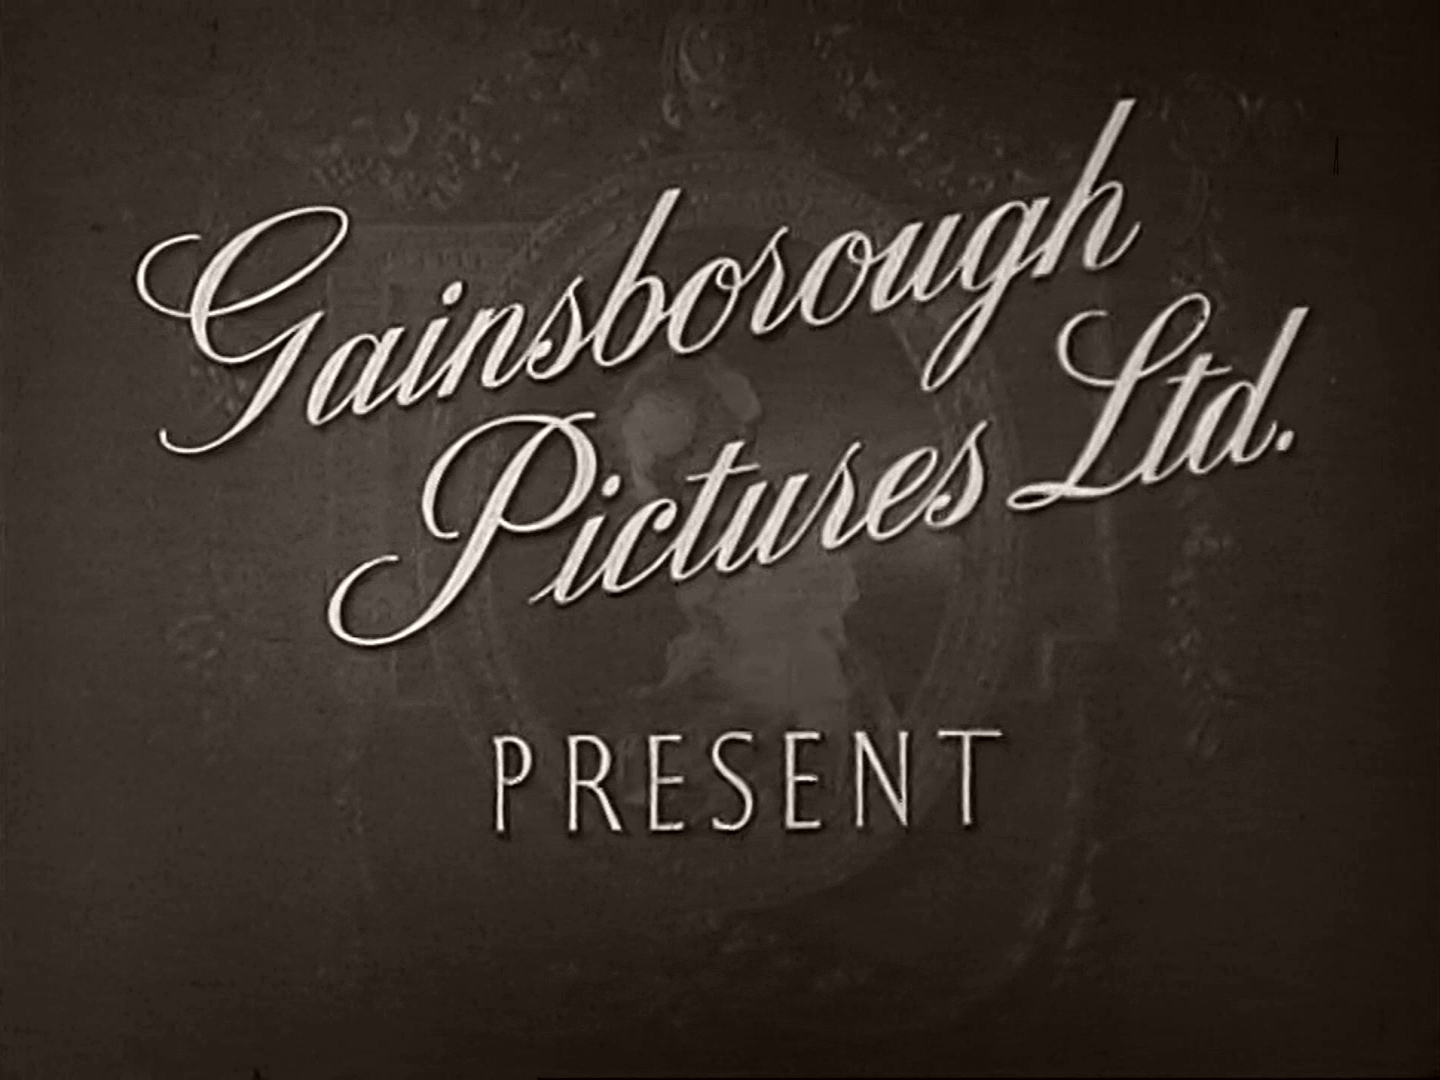 Main title from Love Story (1944) (2). Gainsborough Pictures Ltd present